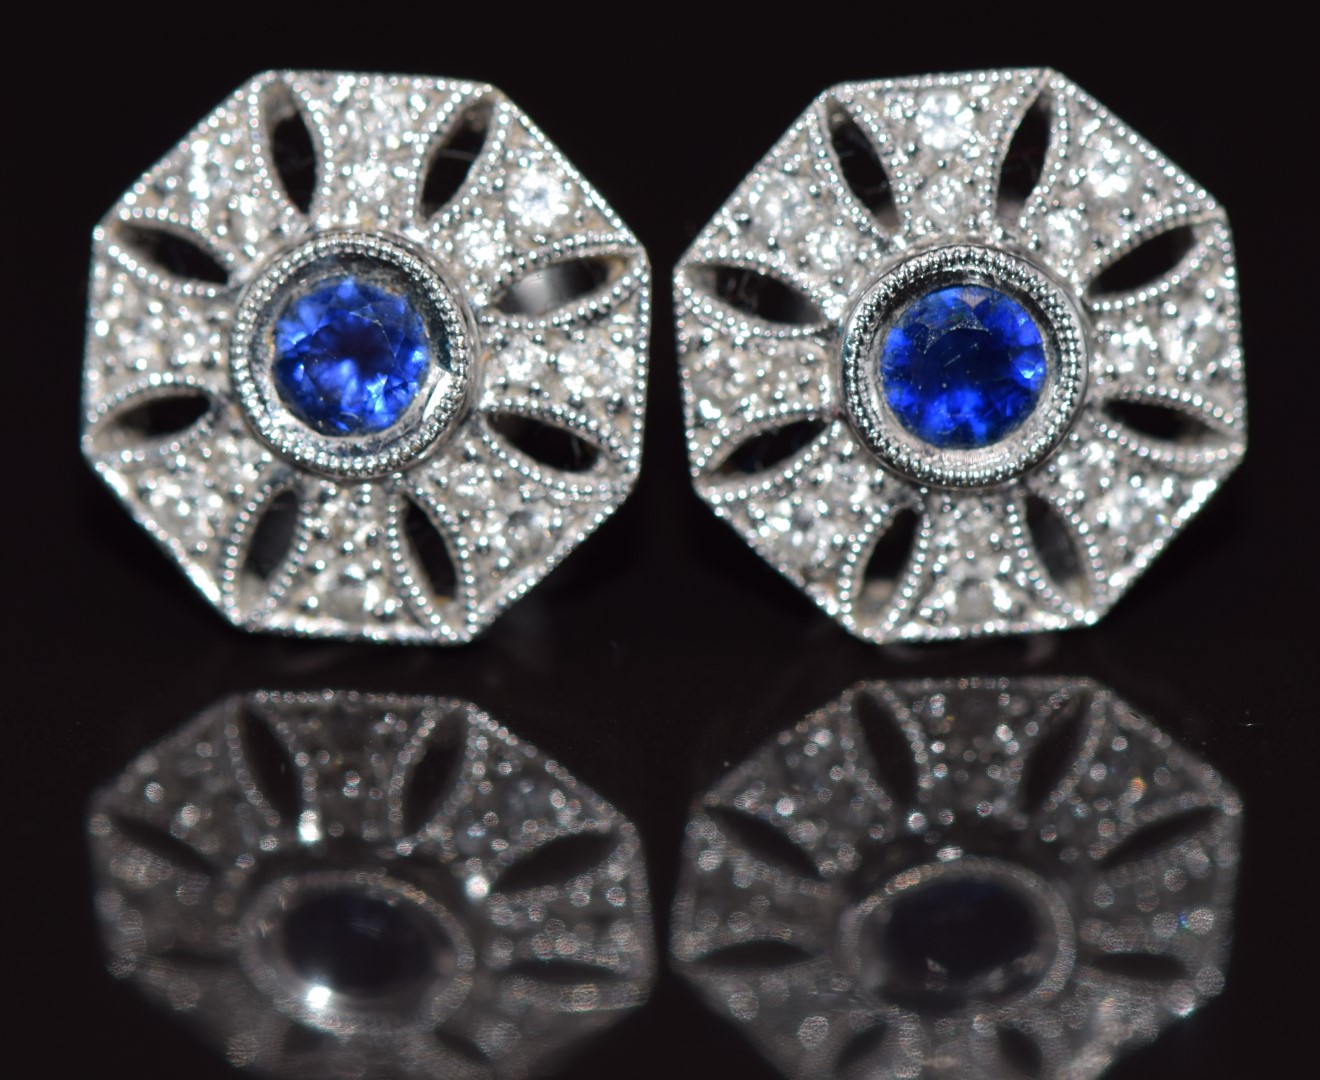 A pair of 18ct white gold earrings set with a sapphire and diamonds in a pierced setting, 4.1g 1.